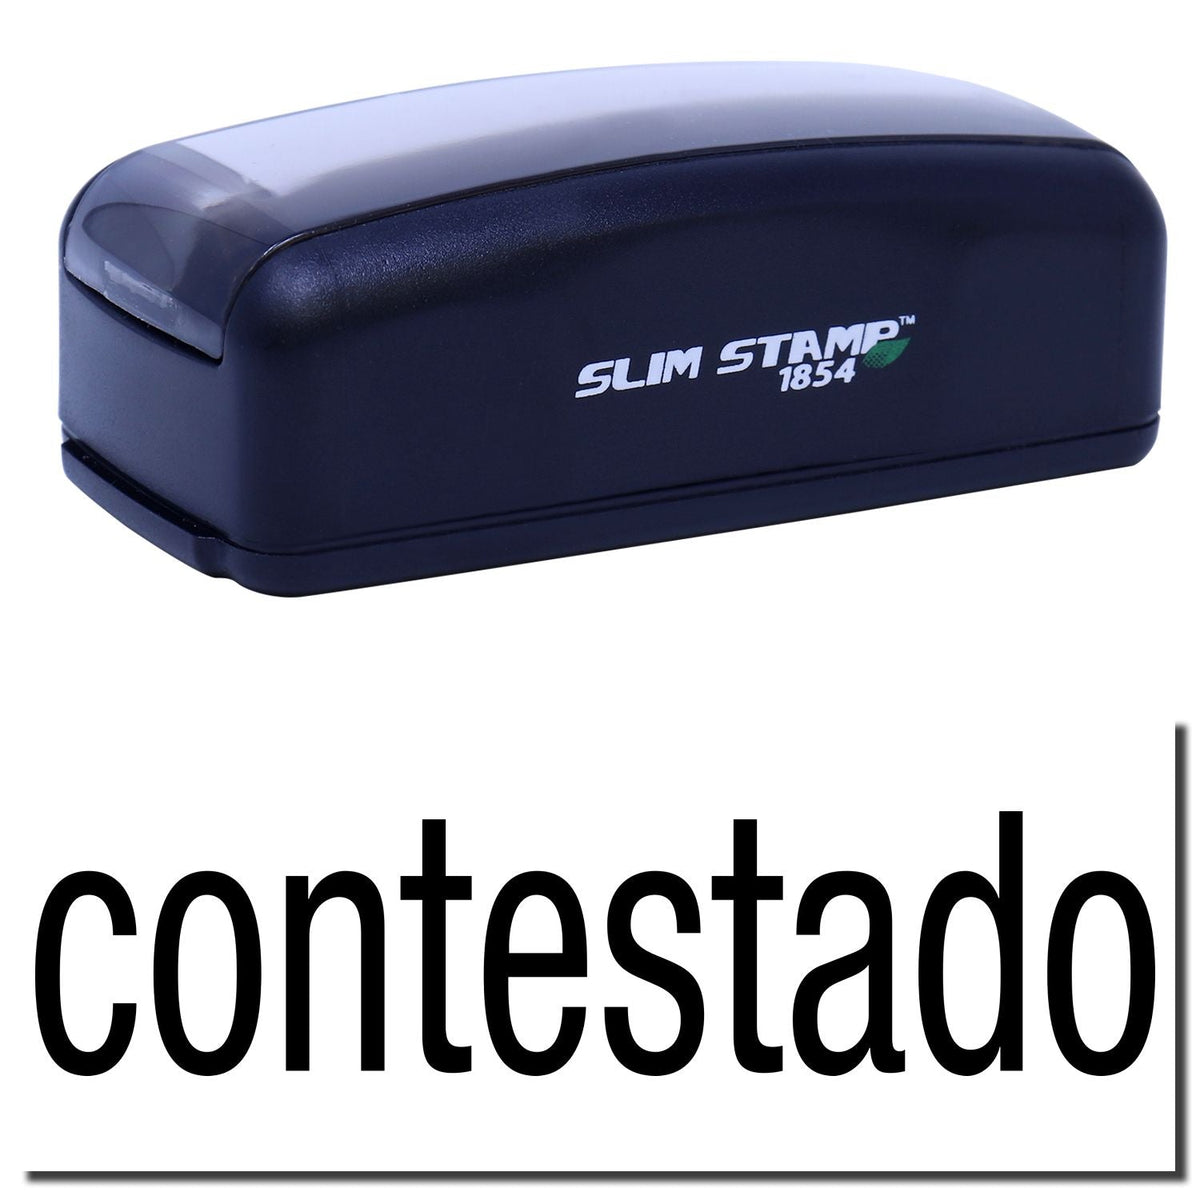 A stock office pre-inked stamp with a stamped image showing how the text &quot;contestado&quot; in a large font is displayed after stamping.